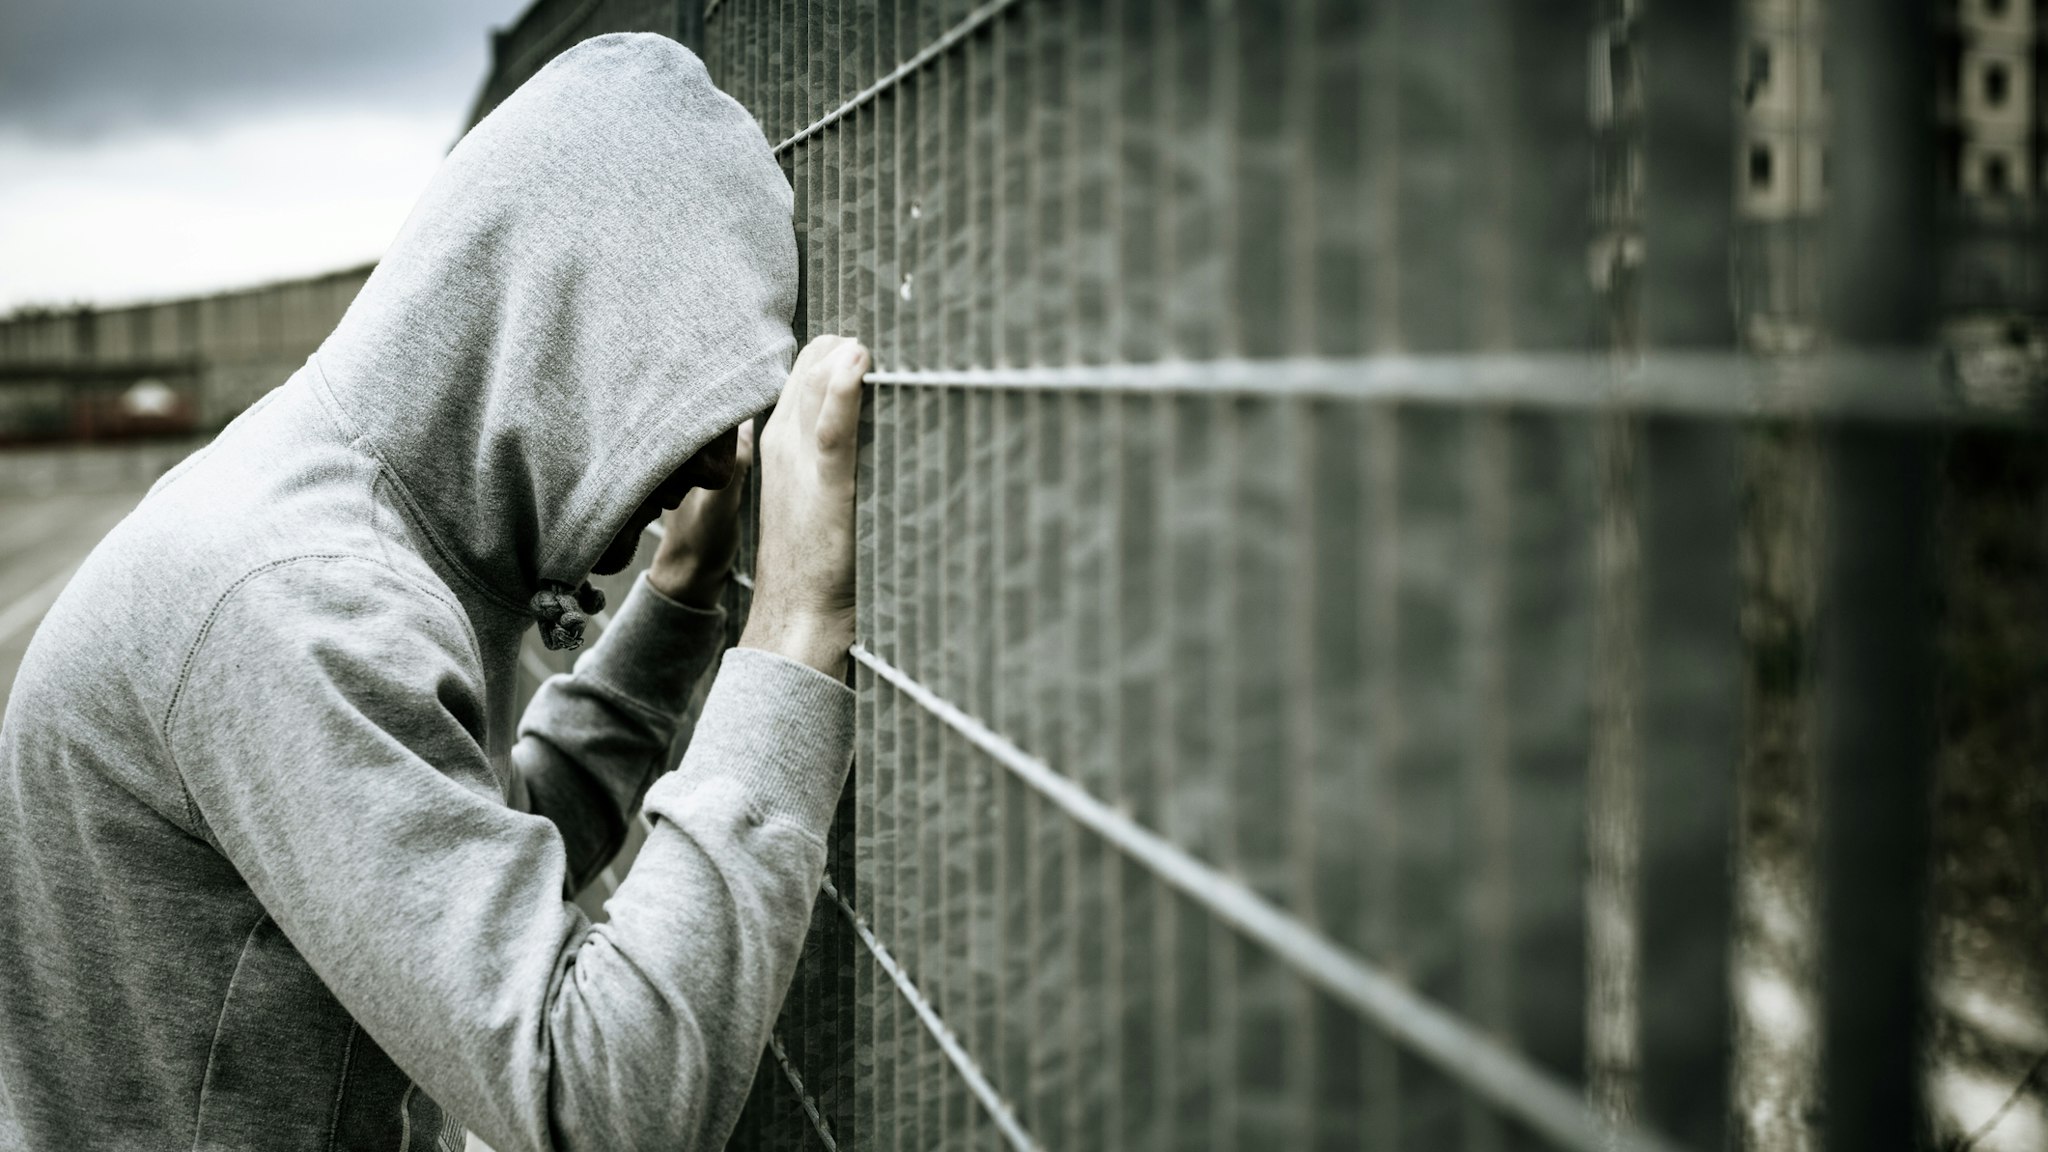 Lonely Man with Hood Leaning on a Fence - stock photo